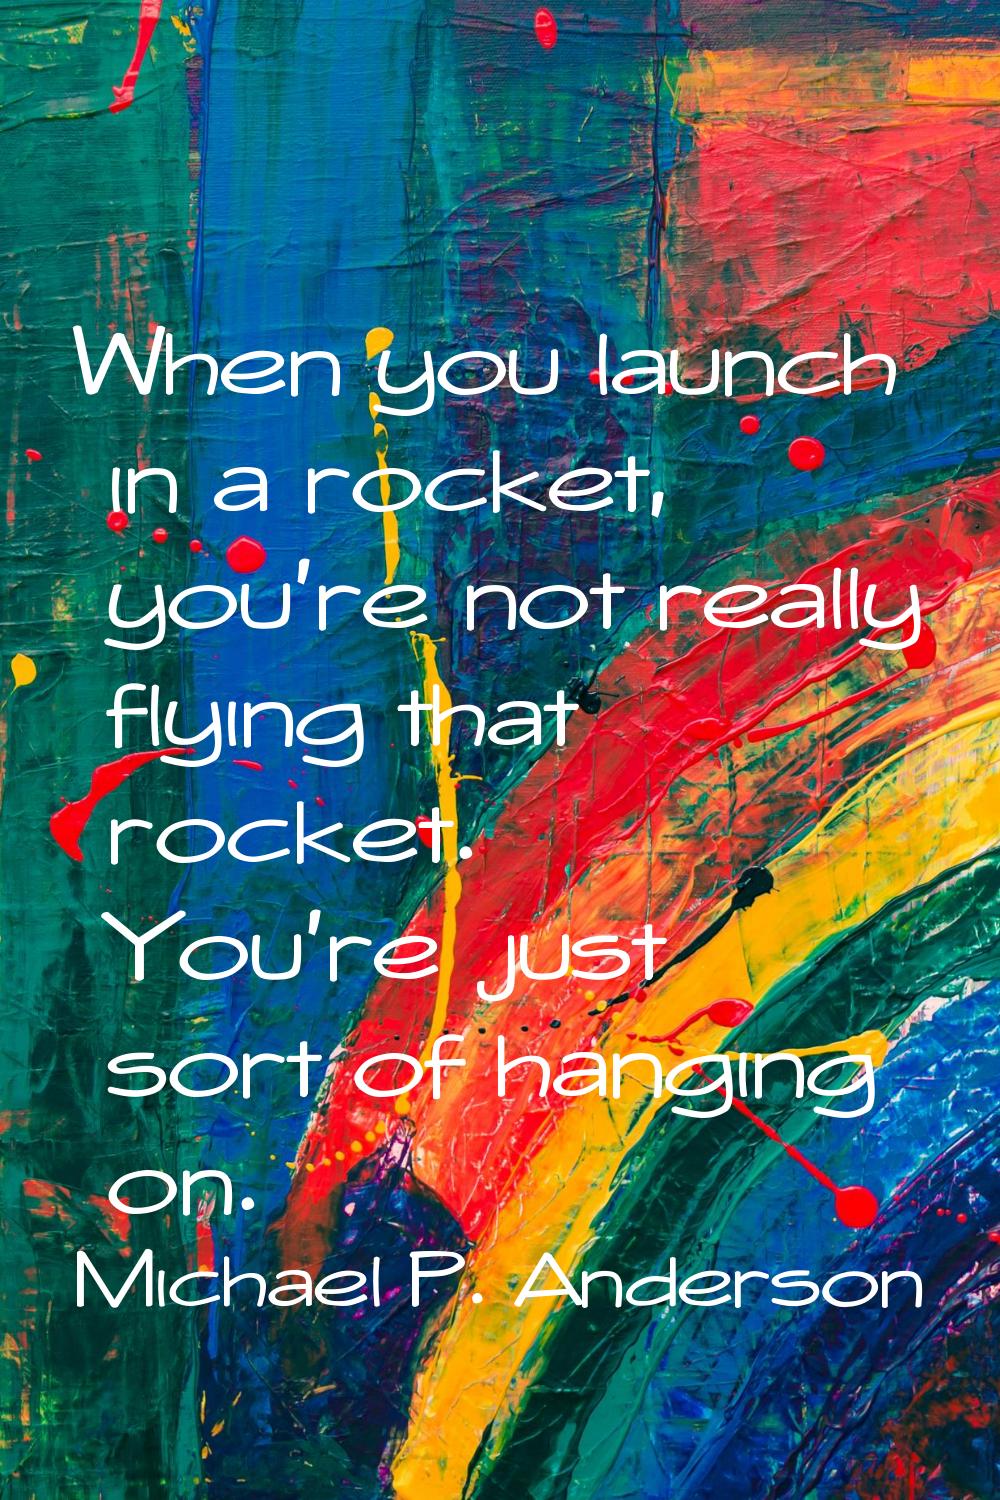 When you launch in a rocket, you're not really flying that rocket. You're just sort of hanging on.